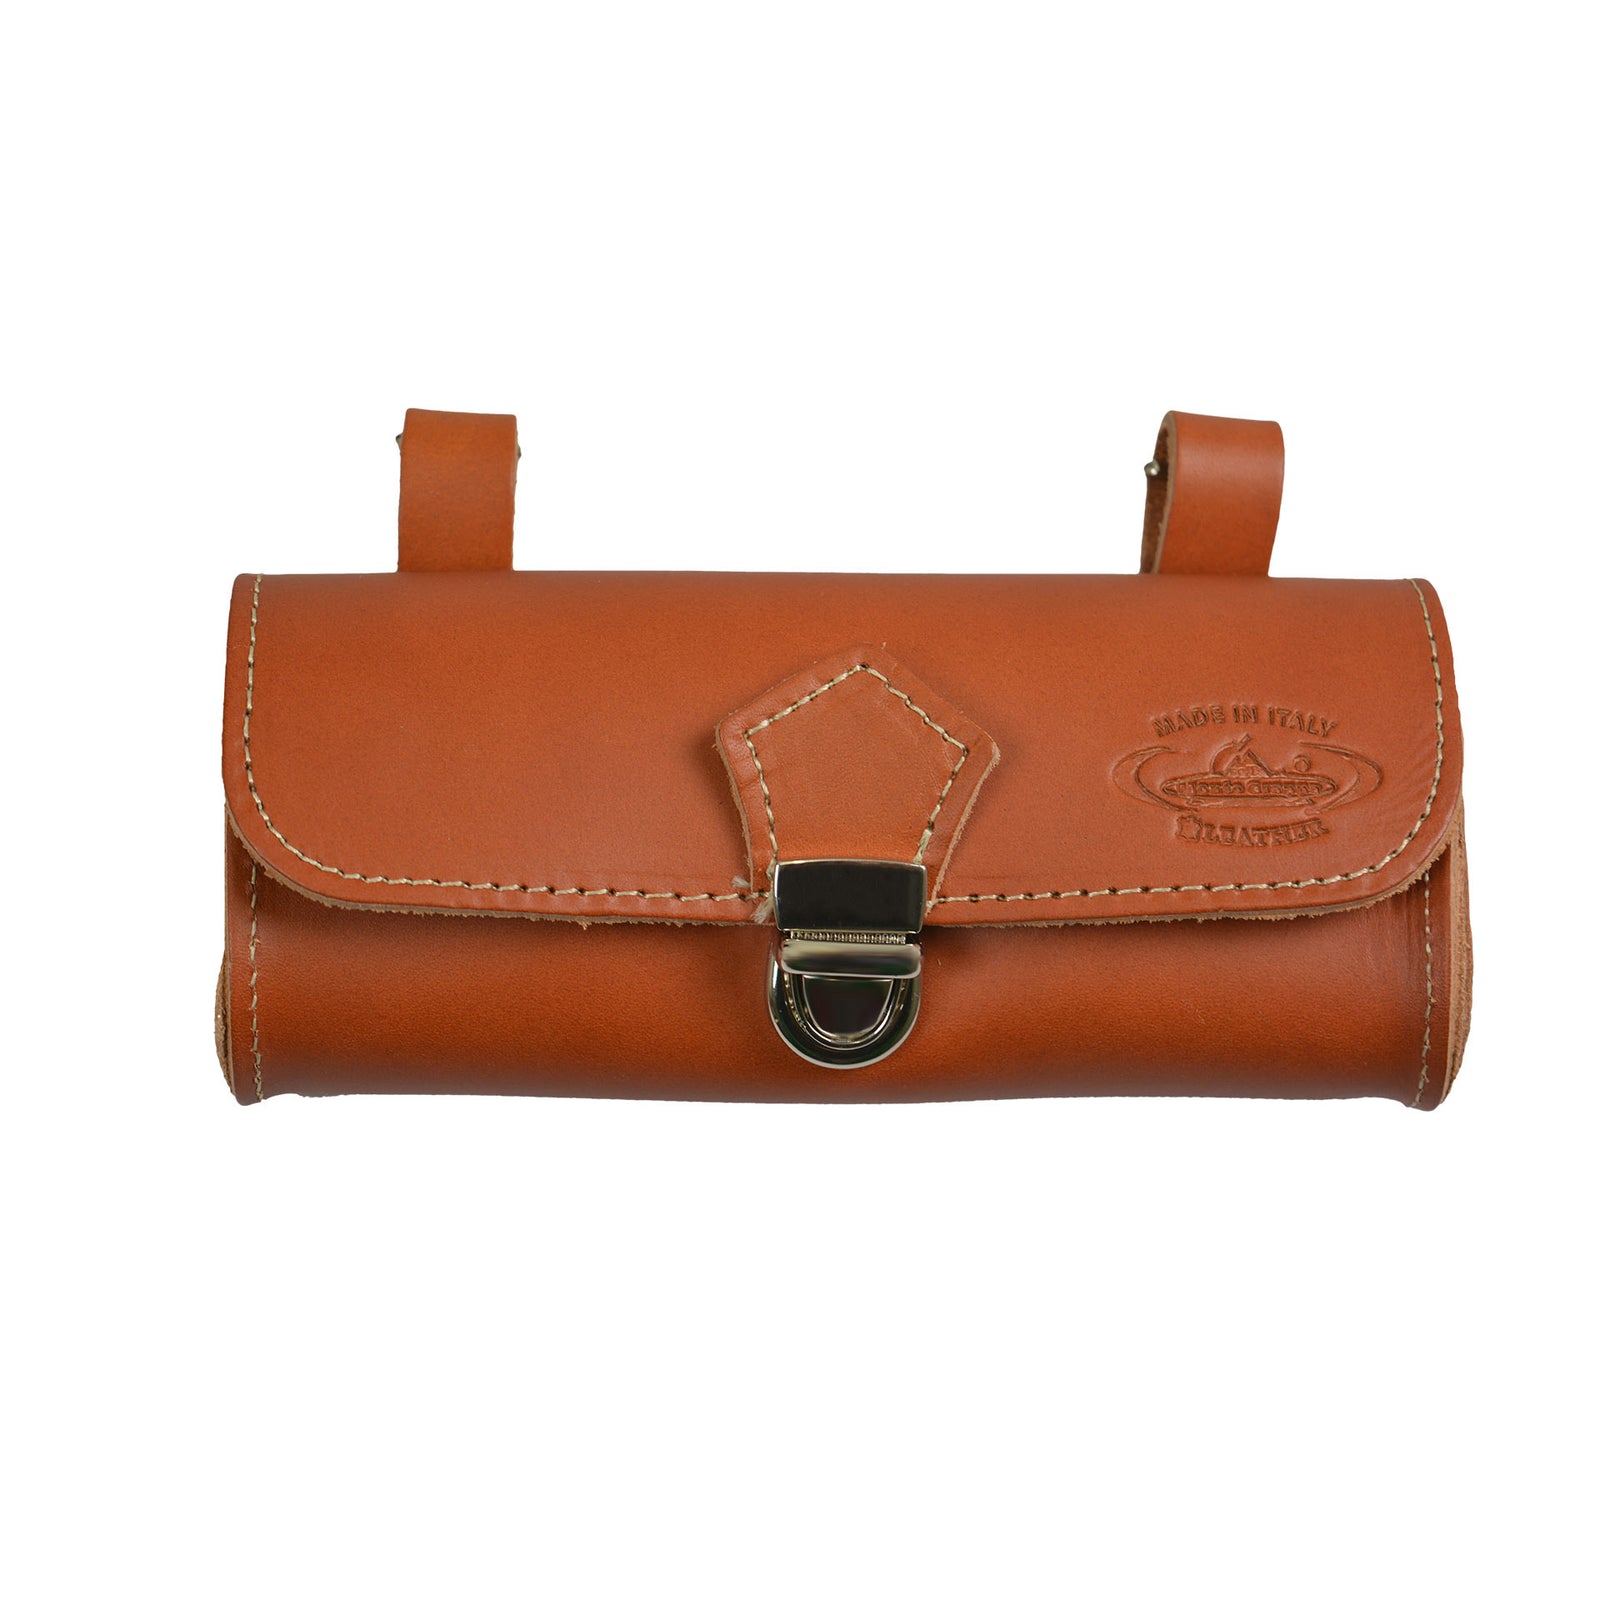 Monte Grappa saddle bag leather cognac with logo